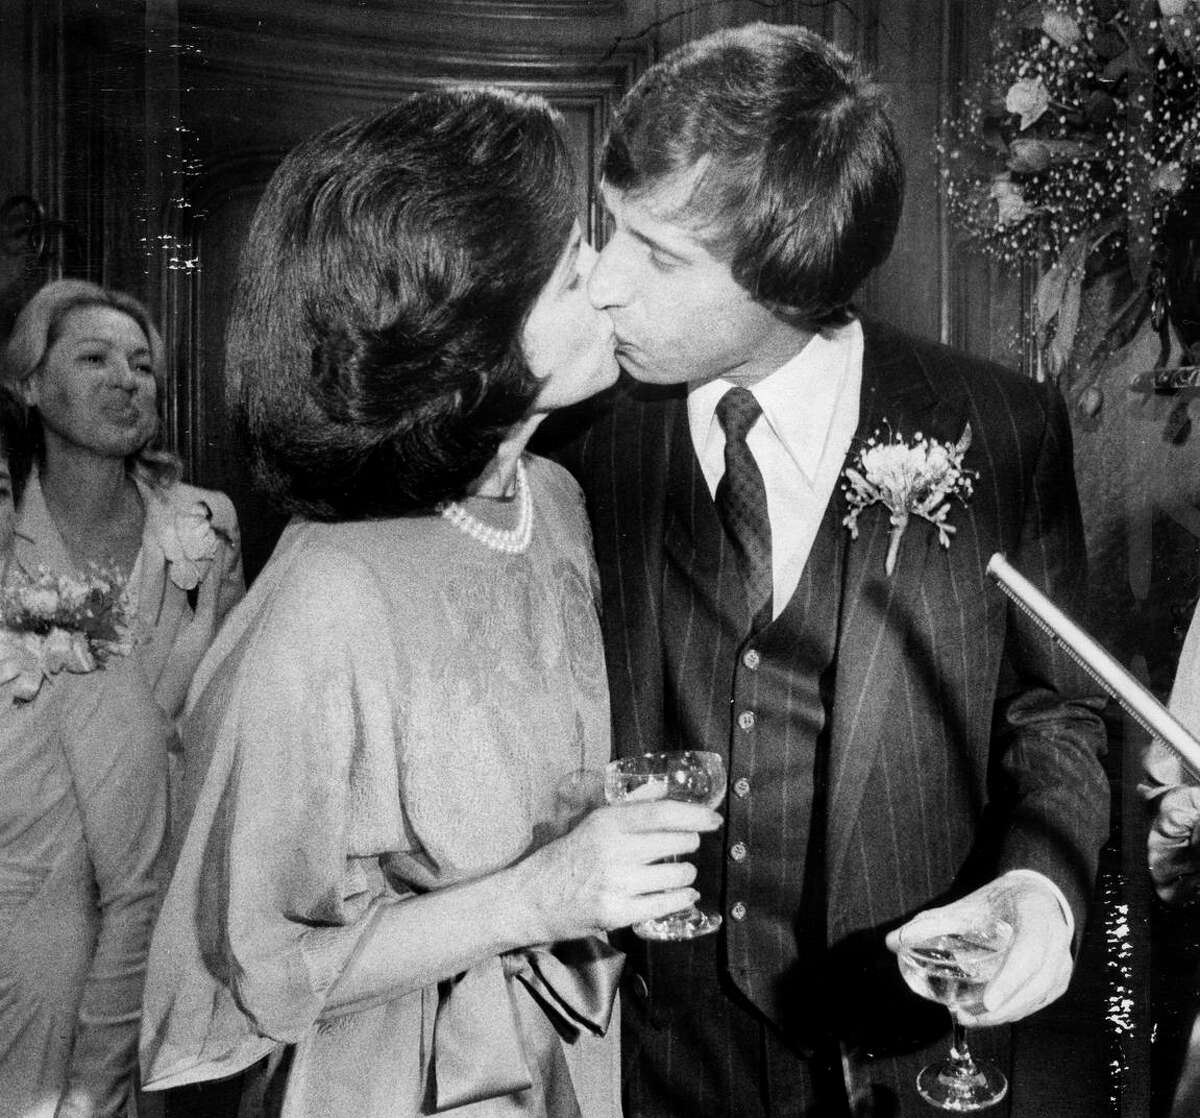 Mayor Dianne Feinstein of San Francisco and investment banker Richard Blum, who married in 1980, share a kiss in her office.